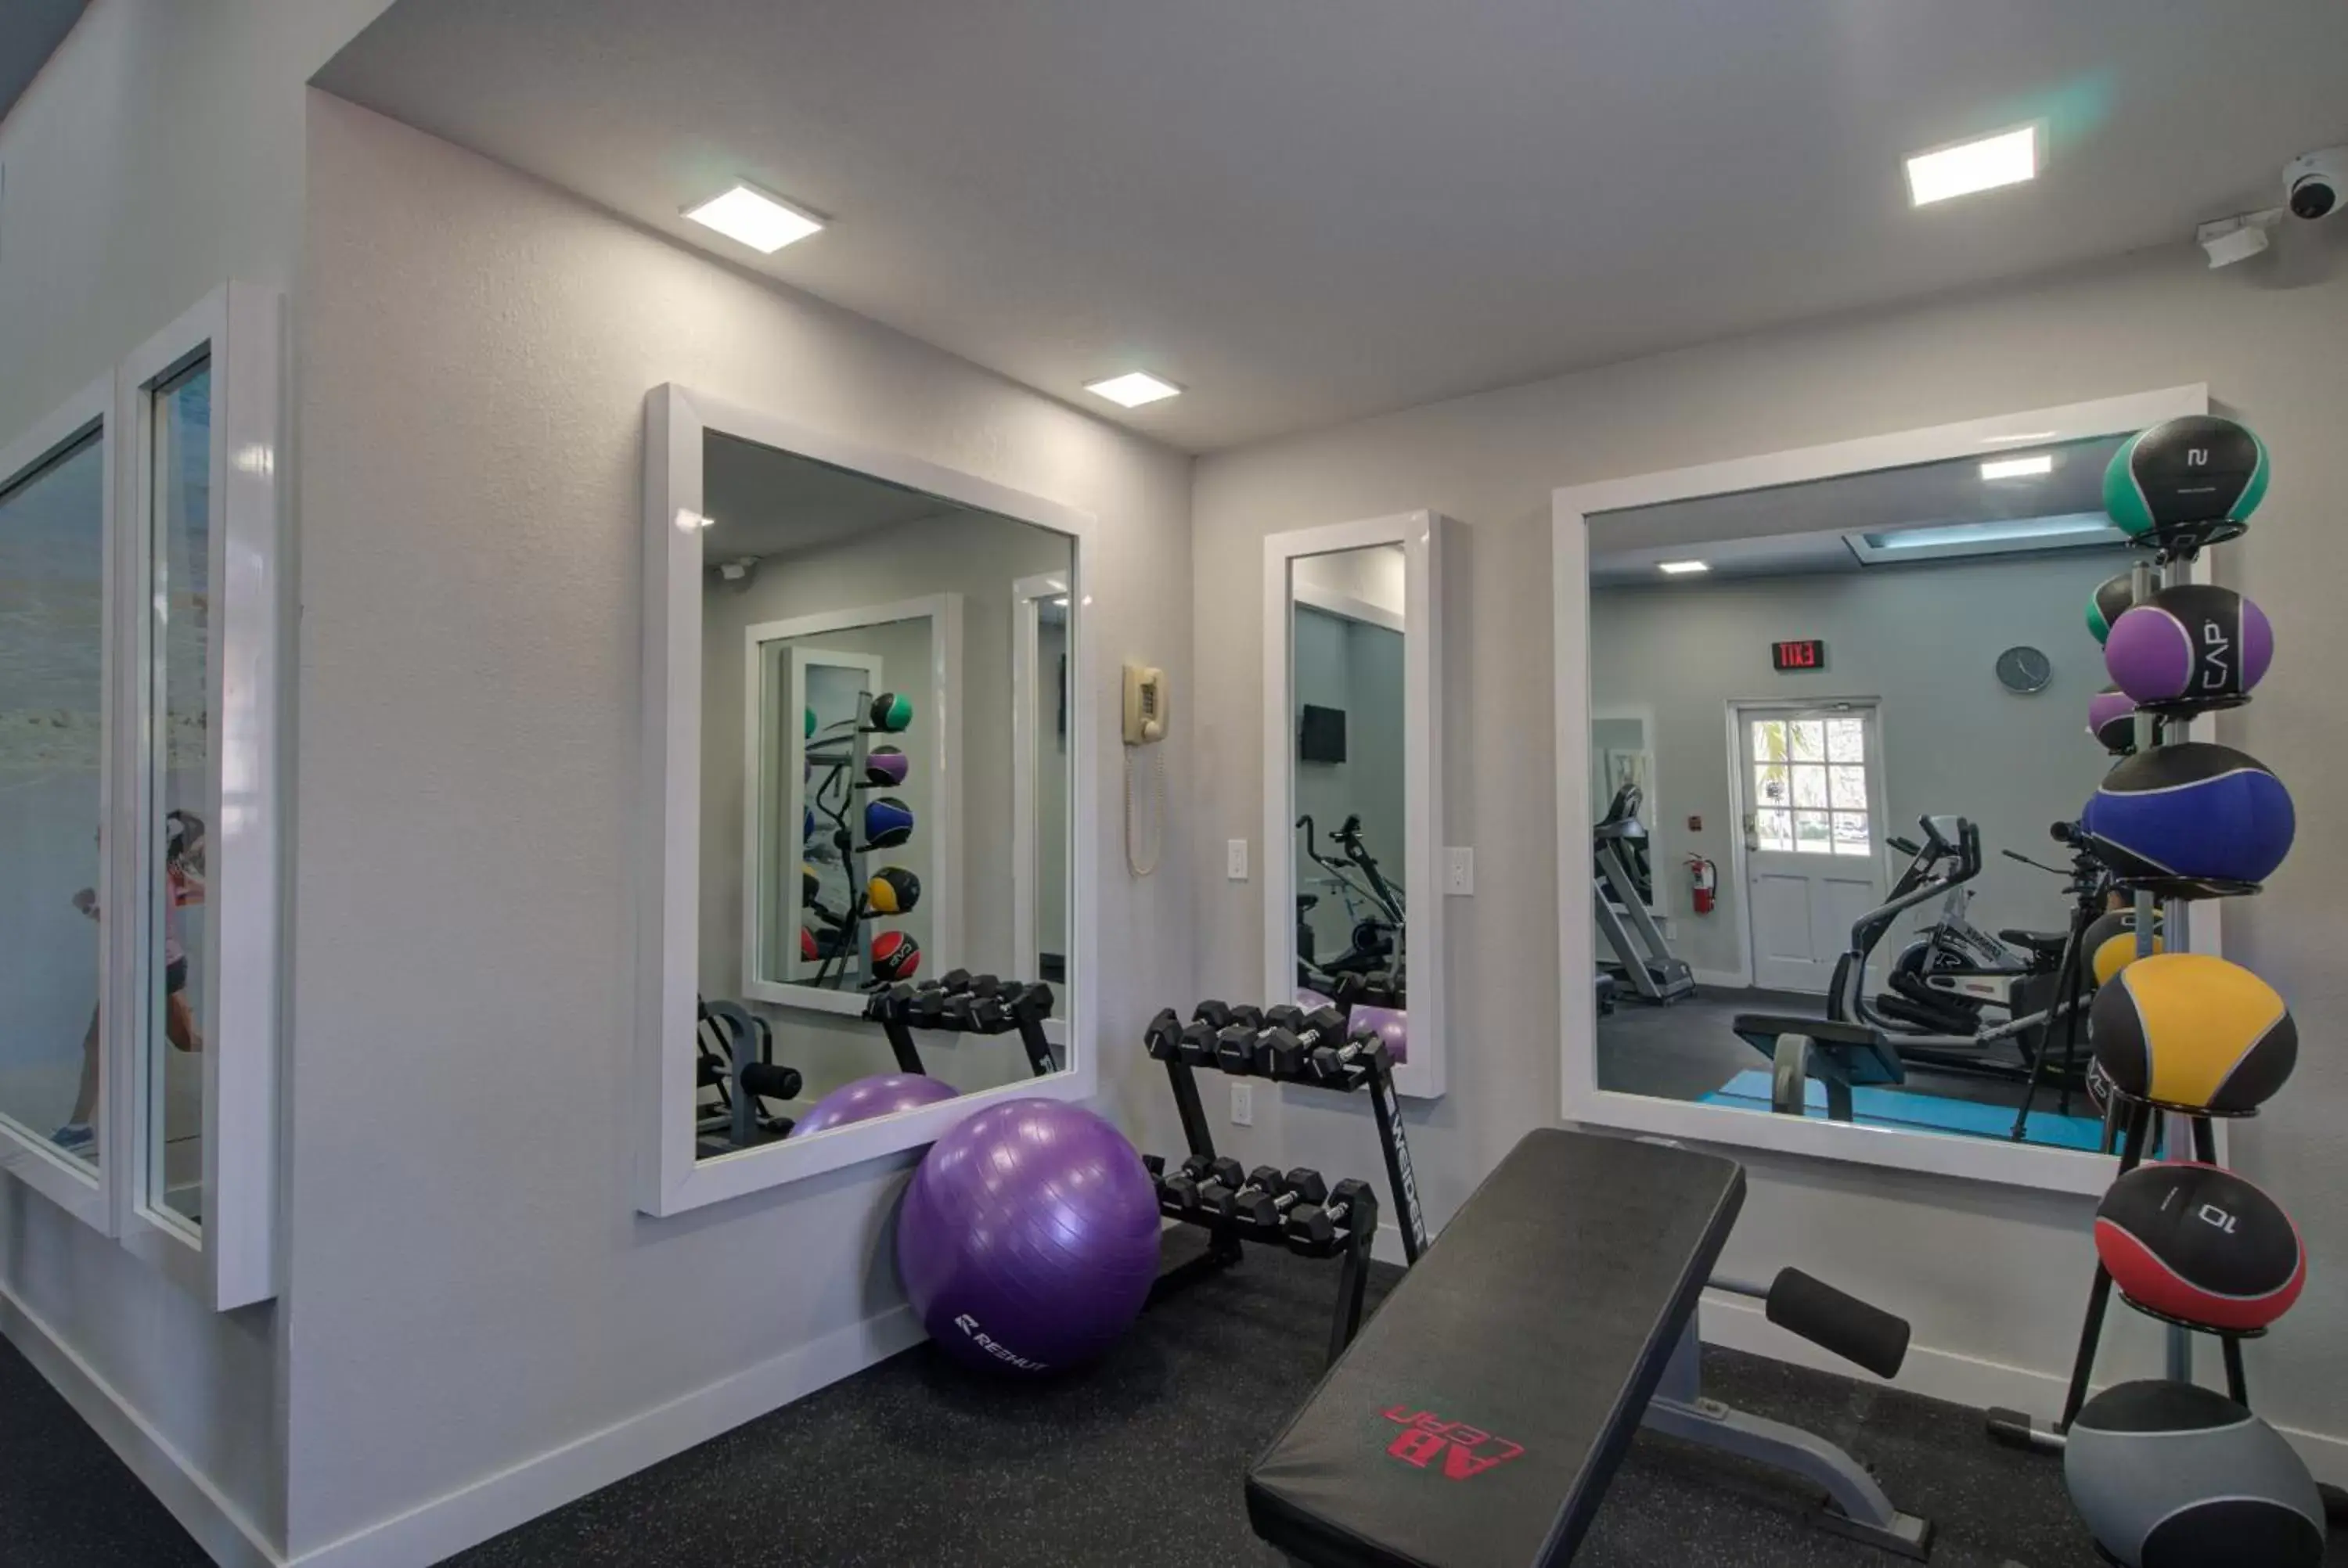 Fitness centre/facilities, Fitness Center/Facilities in Clarion Pointe Tampa East near Fairgrounds and Casino